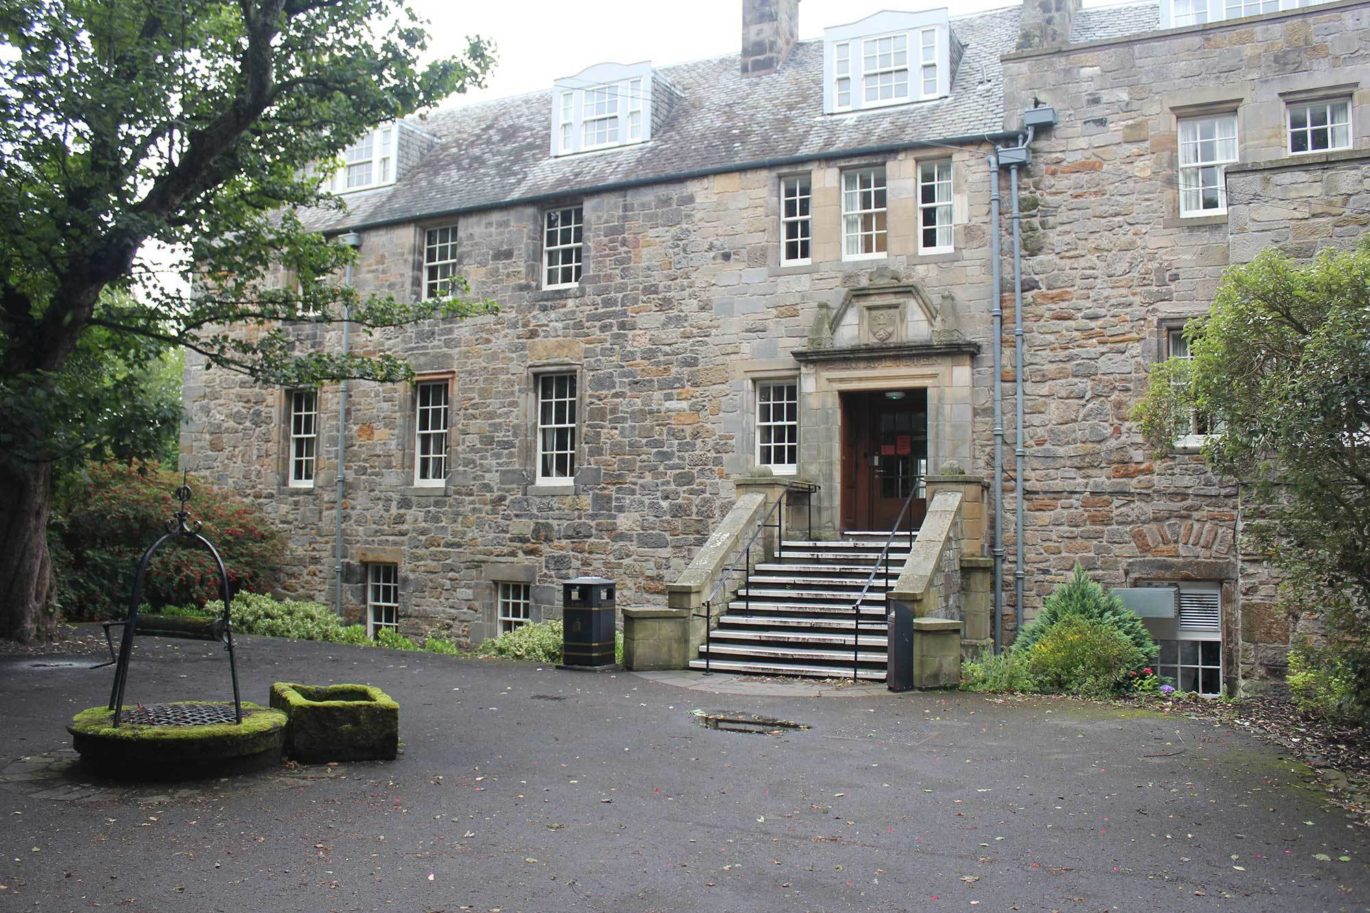 University of St Andrews - Refurbishment of Student Accommodation in the Education Sector